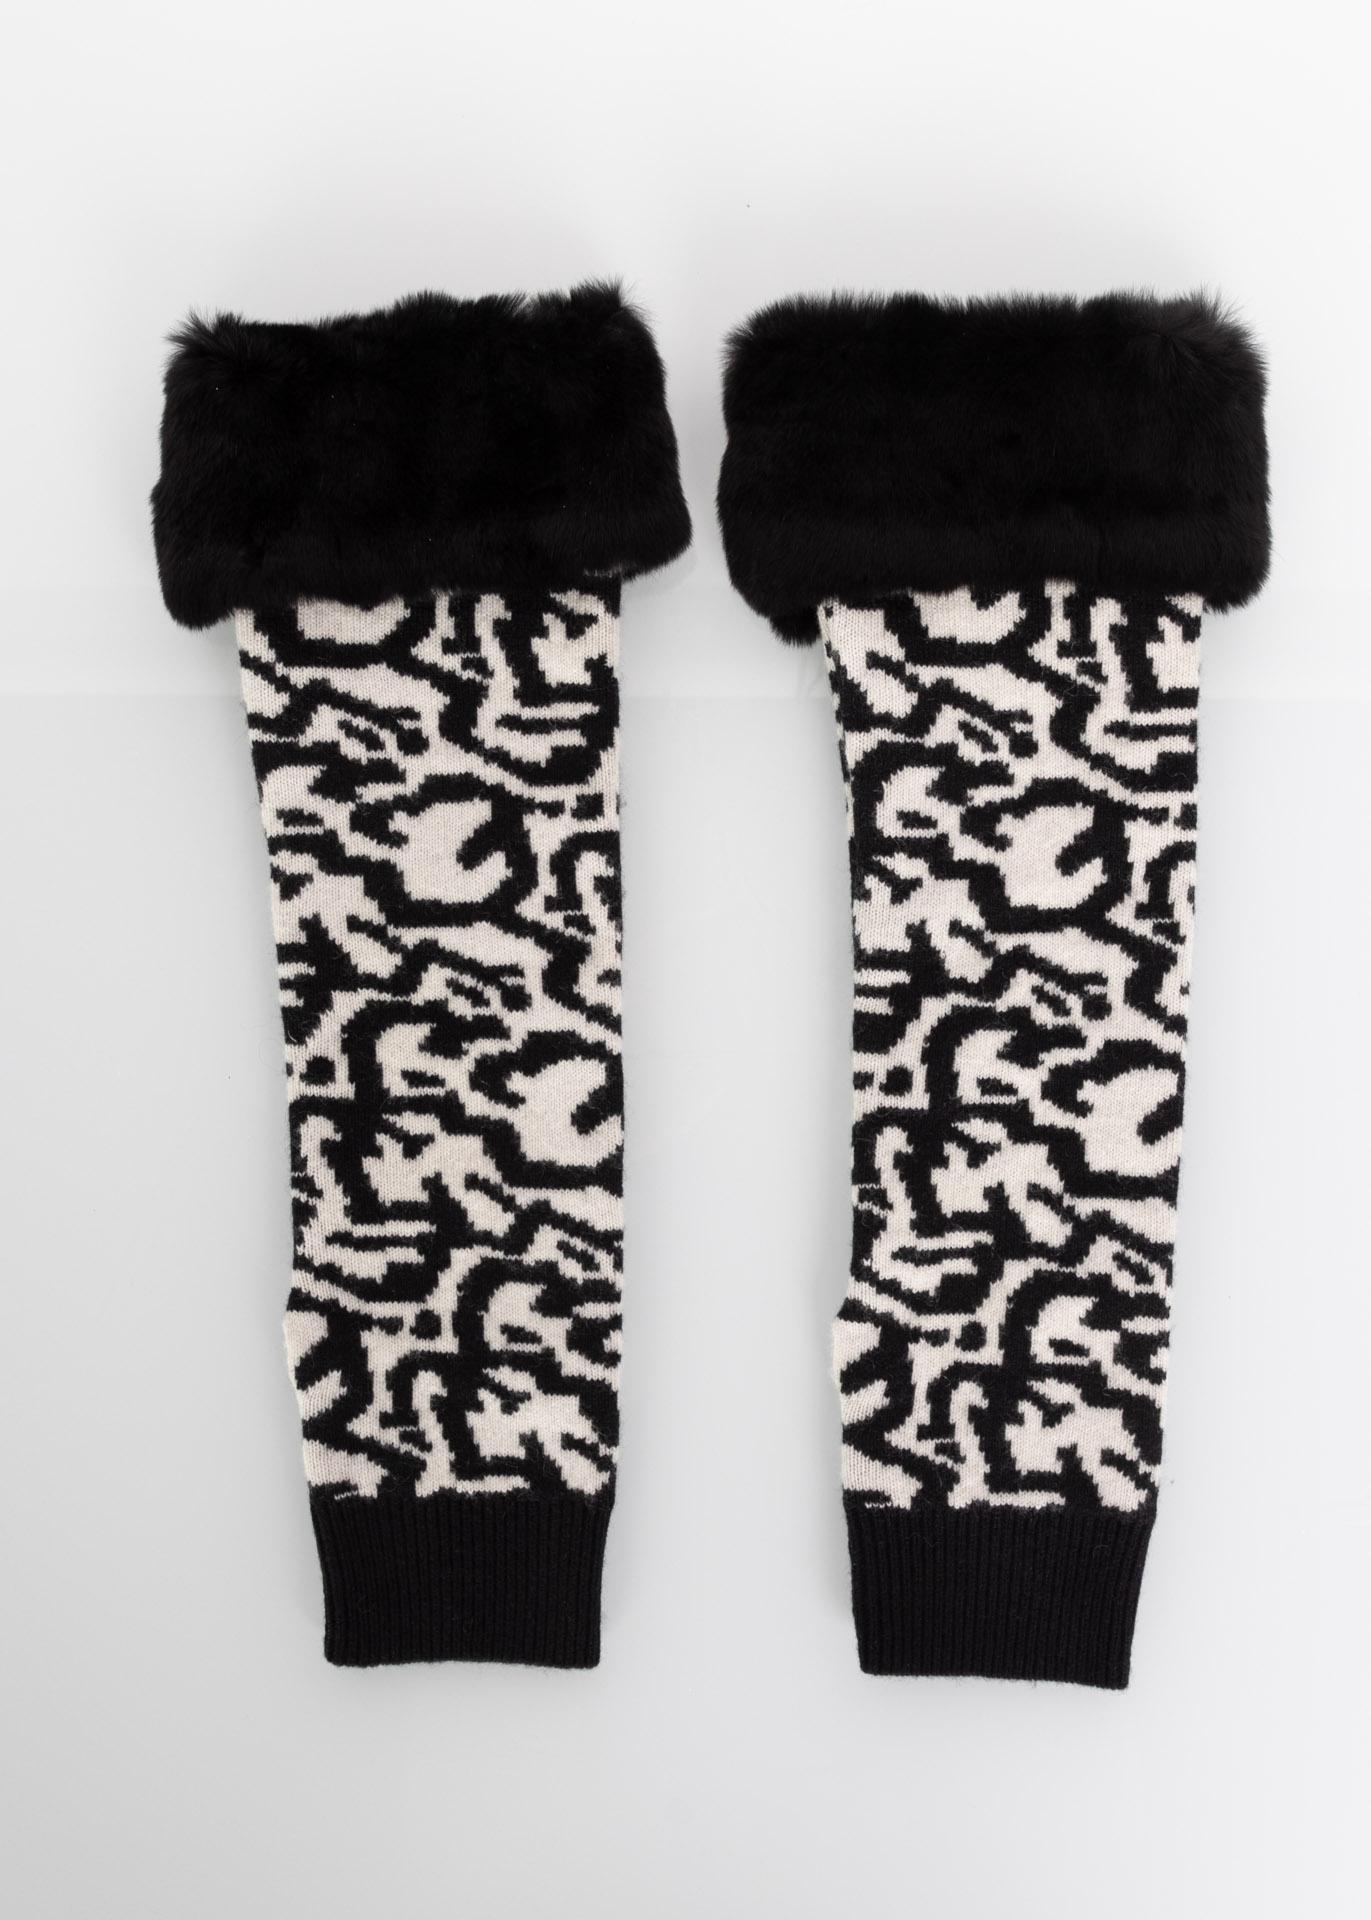 Etro black and white graphic print arm warmers. The top is trimmed in weasel fur. These can be worn higher up on the arm or over the hand and use the optional thumb hole.
Excellent condition.

Size estimate: One size fits most
Measurements:
Length: